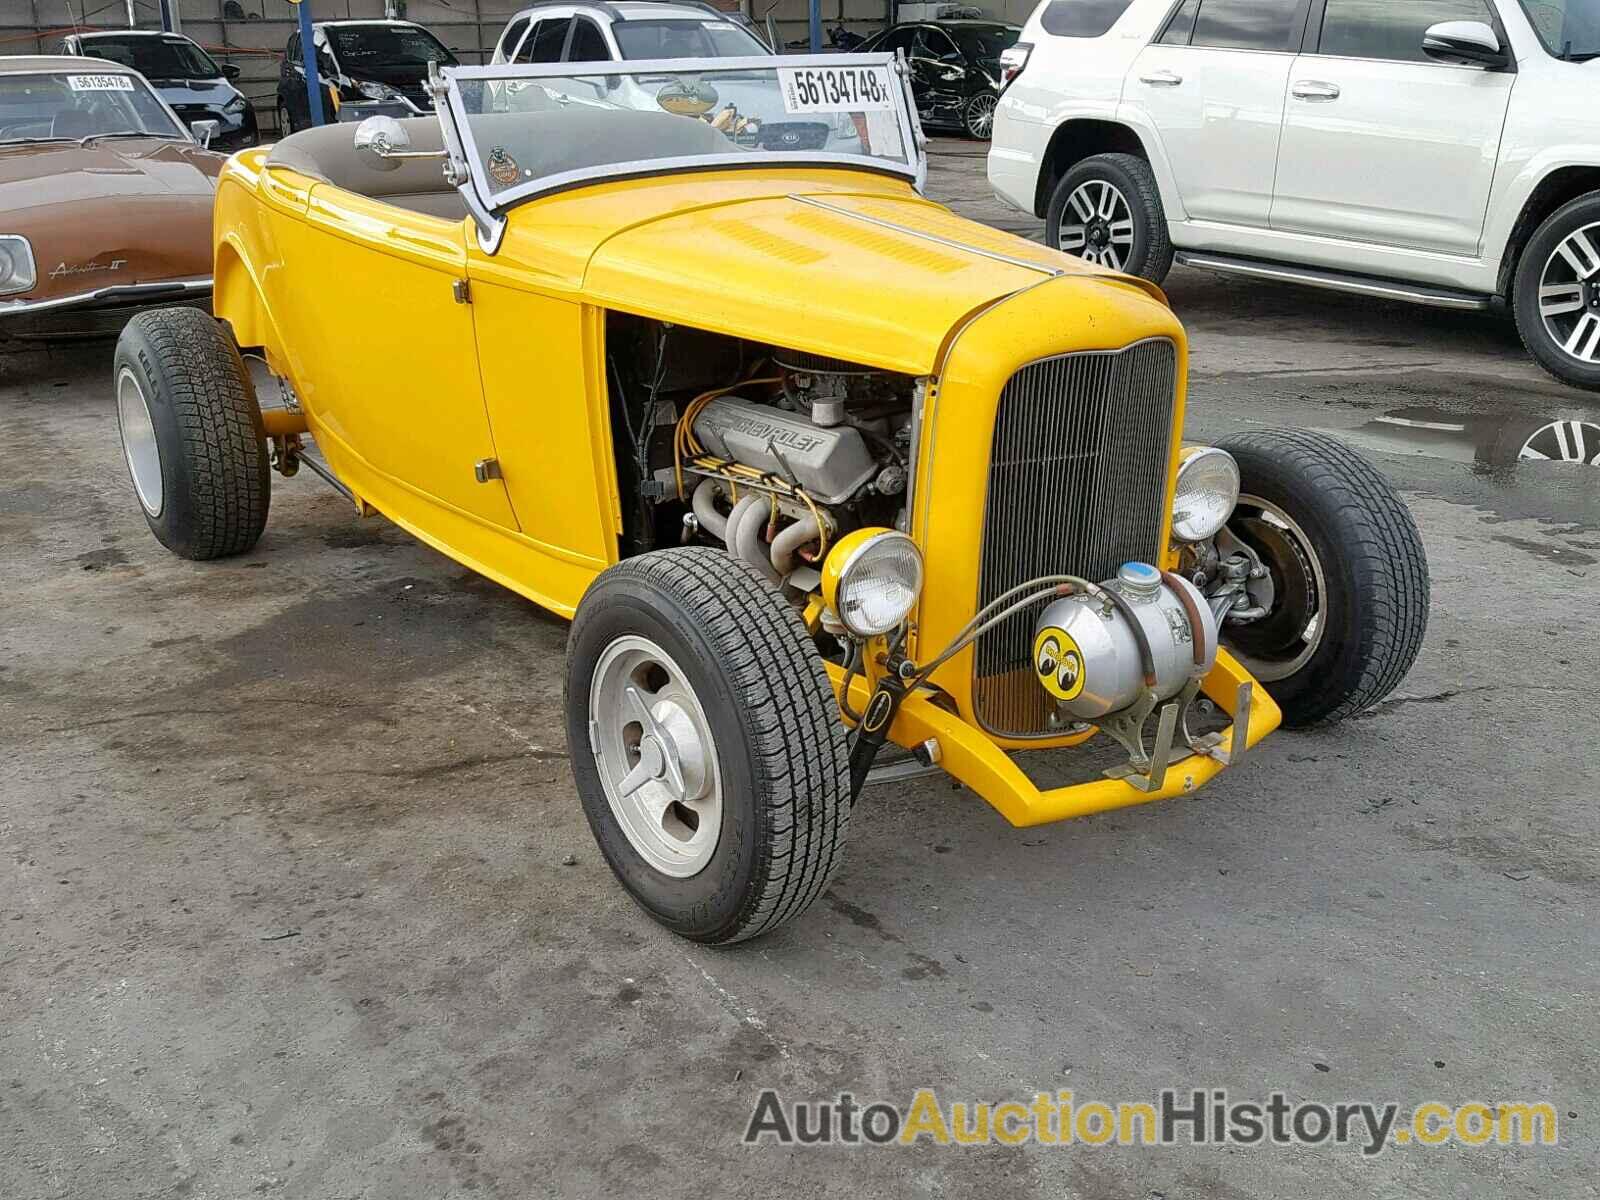 1932 FORD COUPE, 3707306